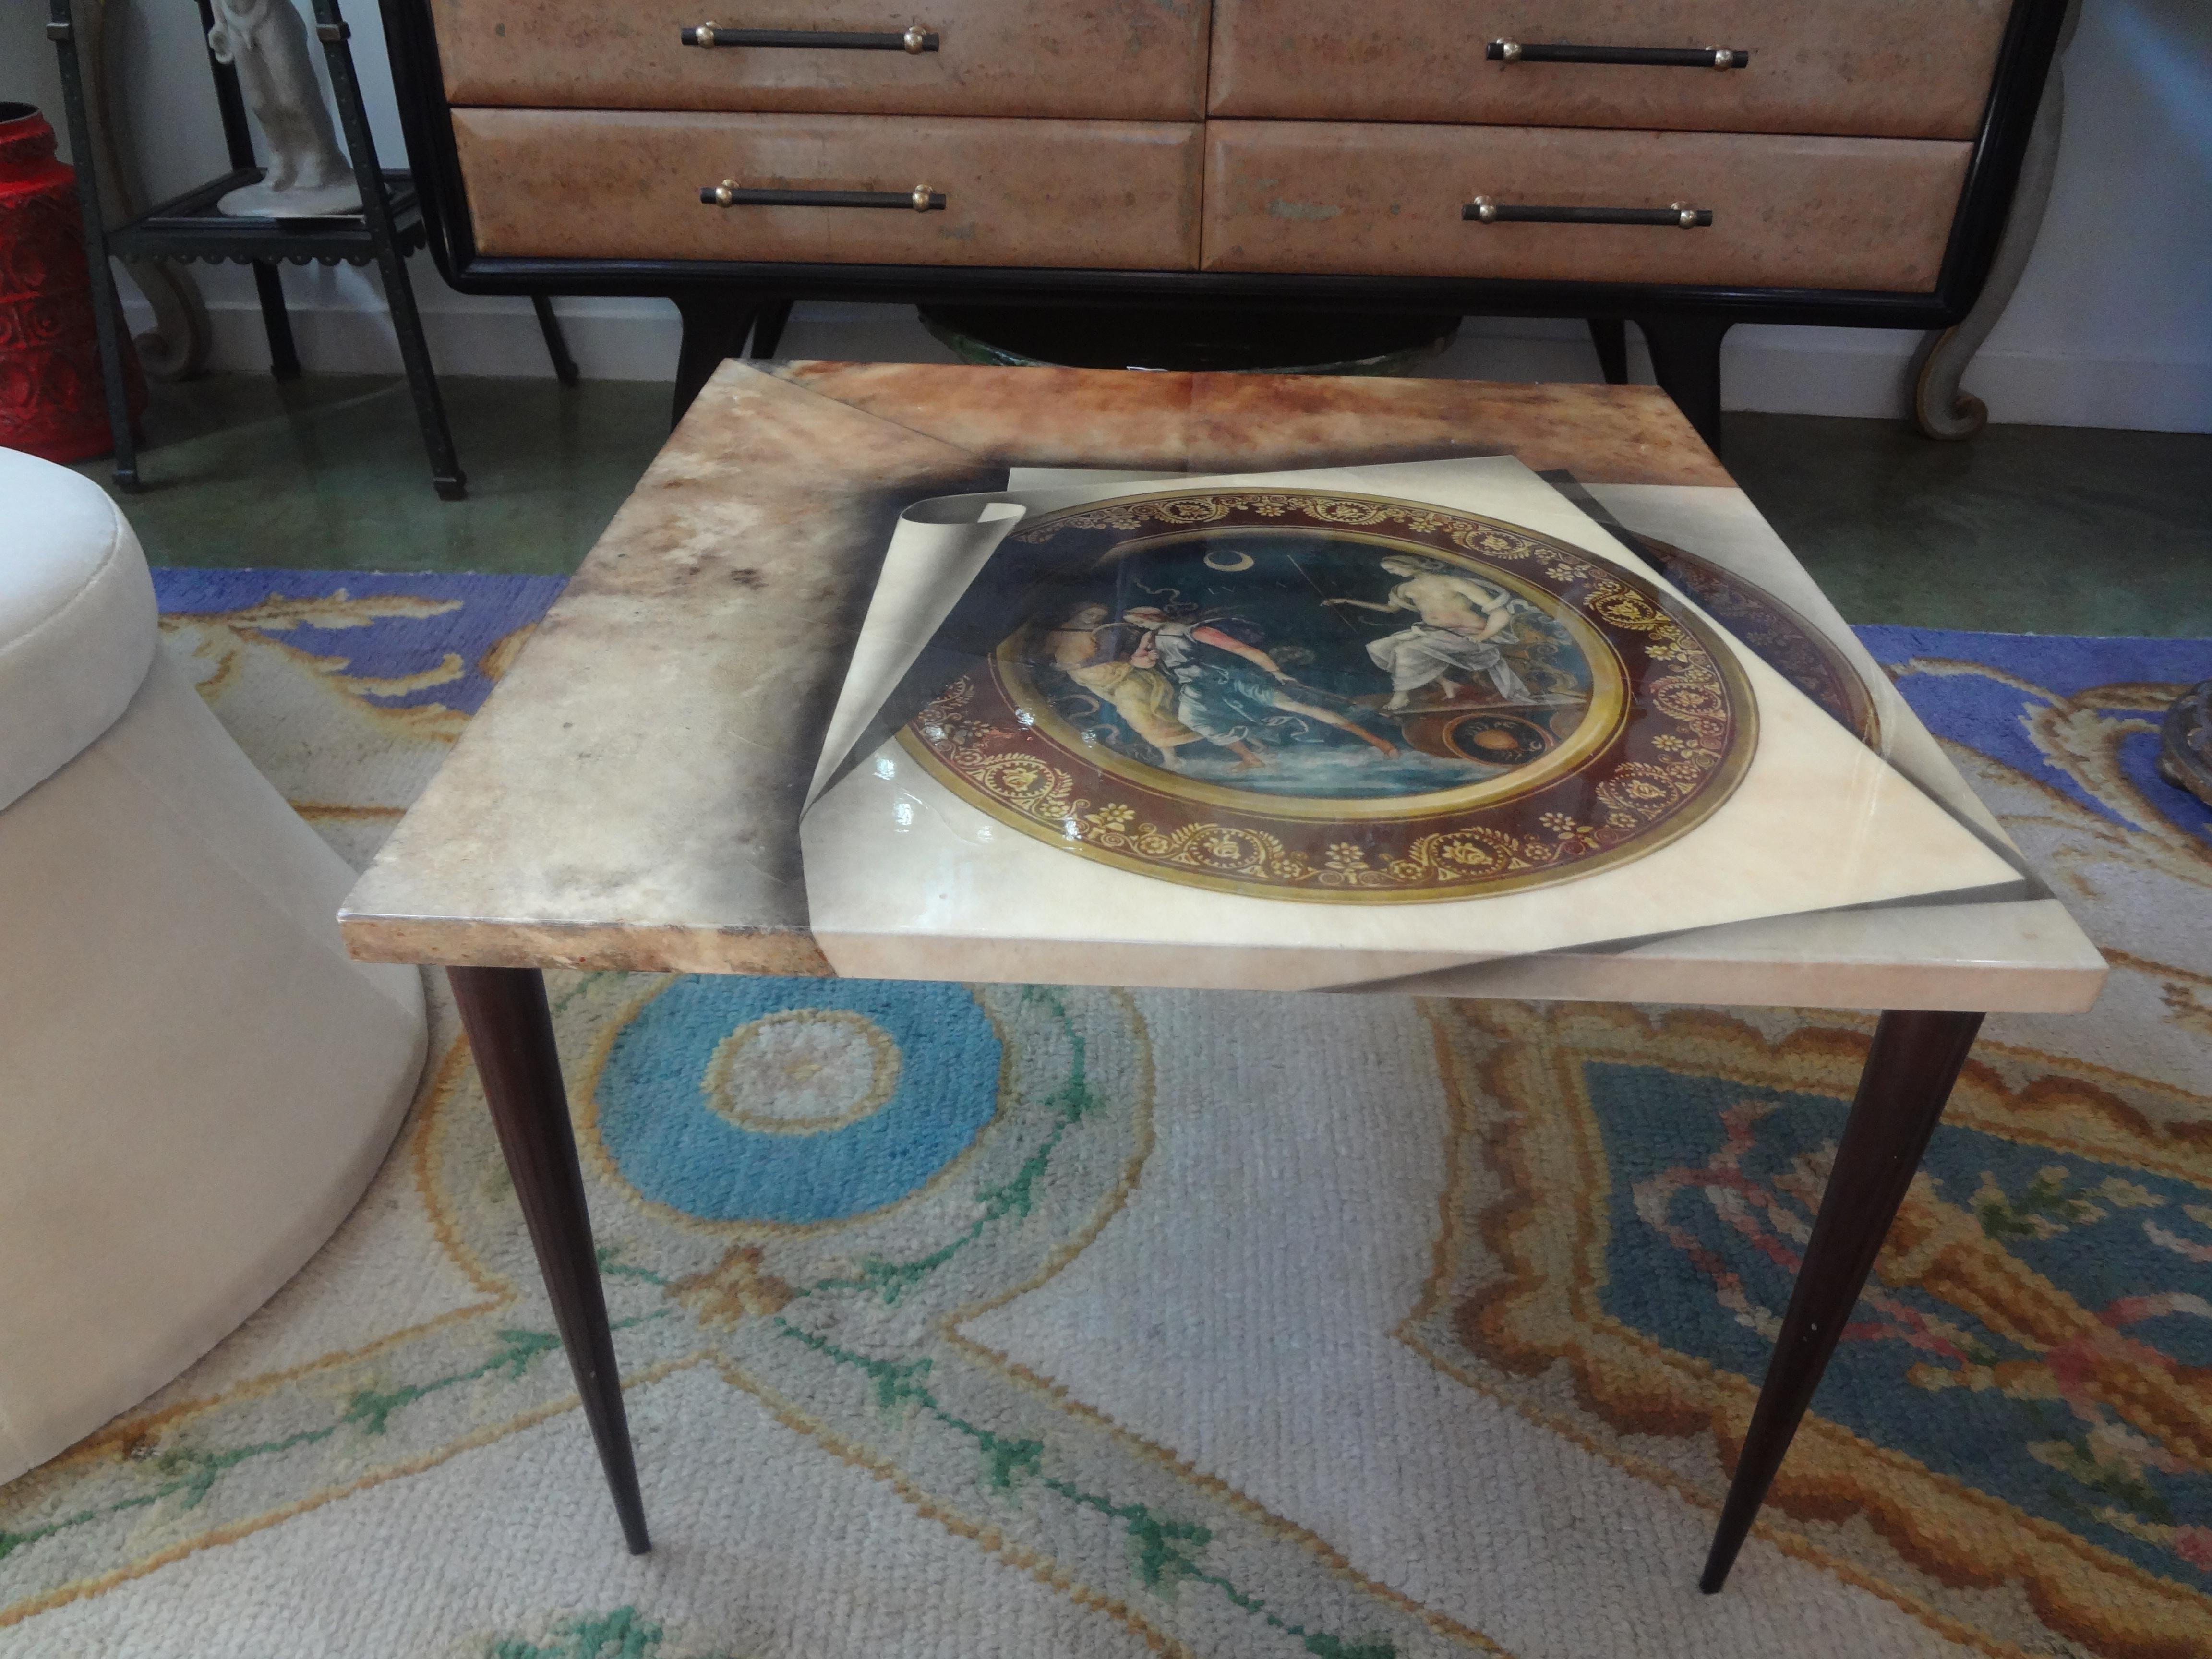 Italian Aldo Tura lacquered goatskin table. This stunning Italian lacquered goatskin square table has an unusual Neoclassical Trompe L'oeil design resting on tapered legs.
This lovely Italian Hollywood Regency table can be used as a side table or